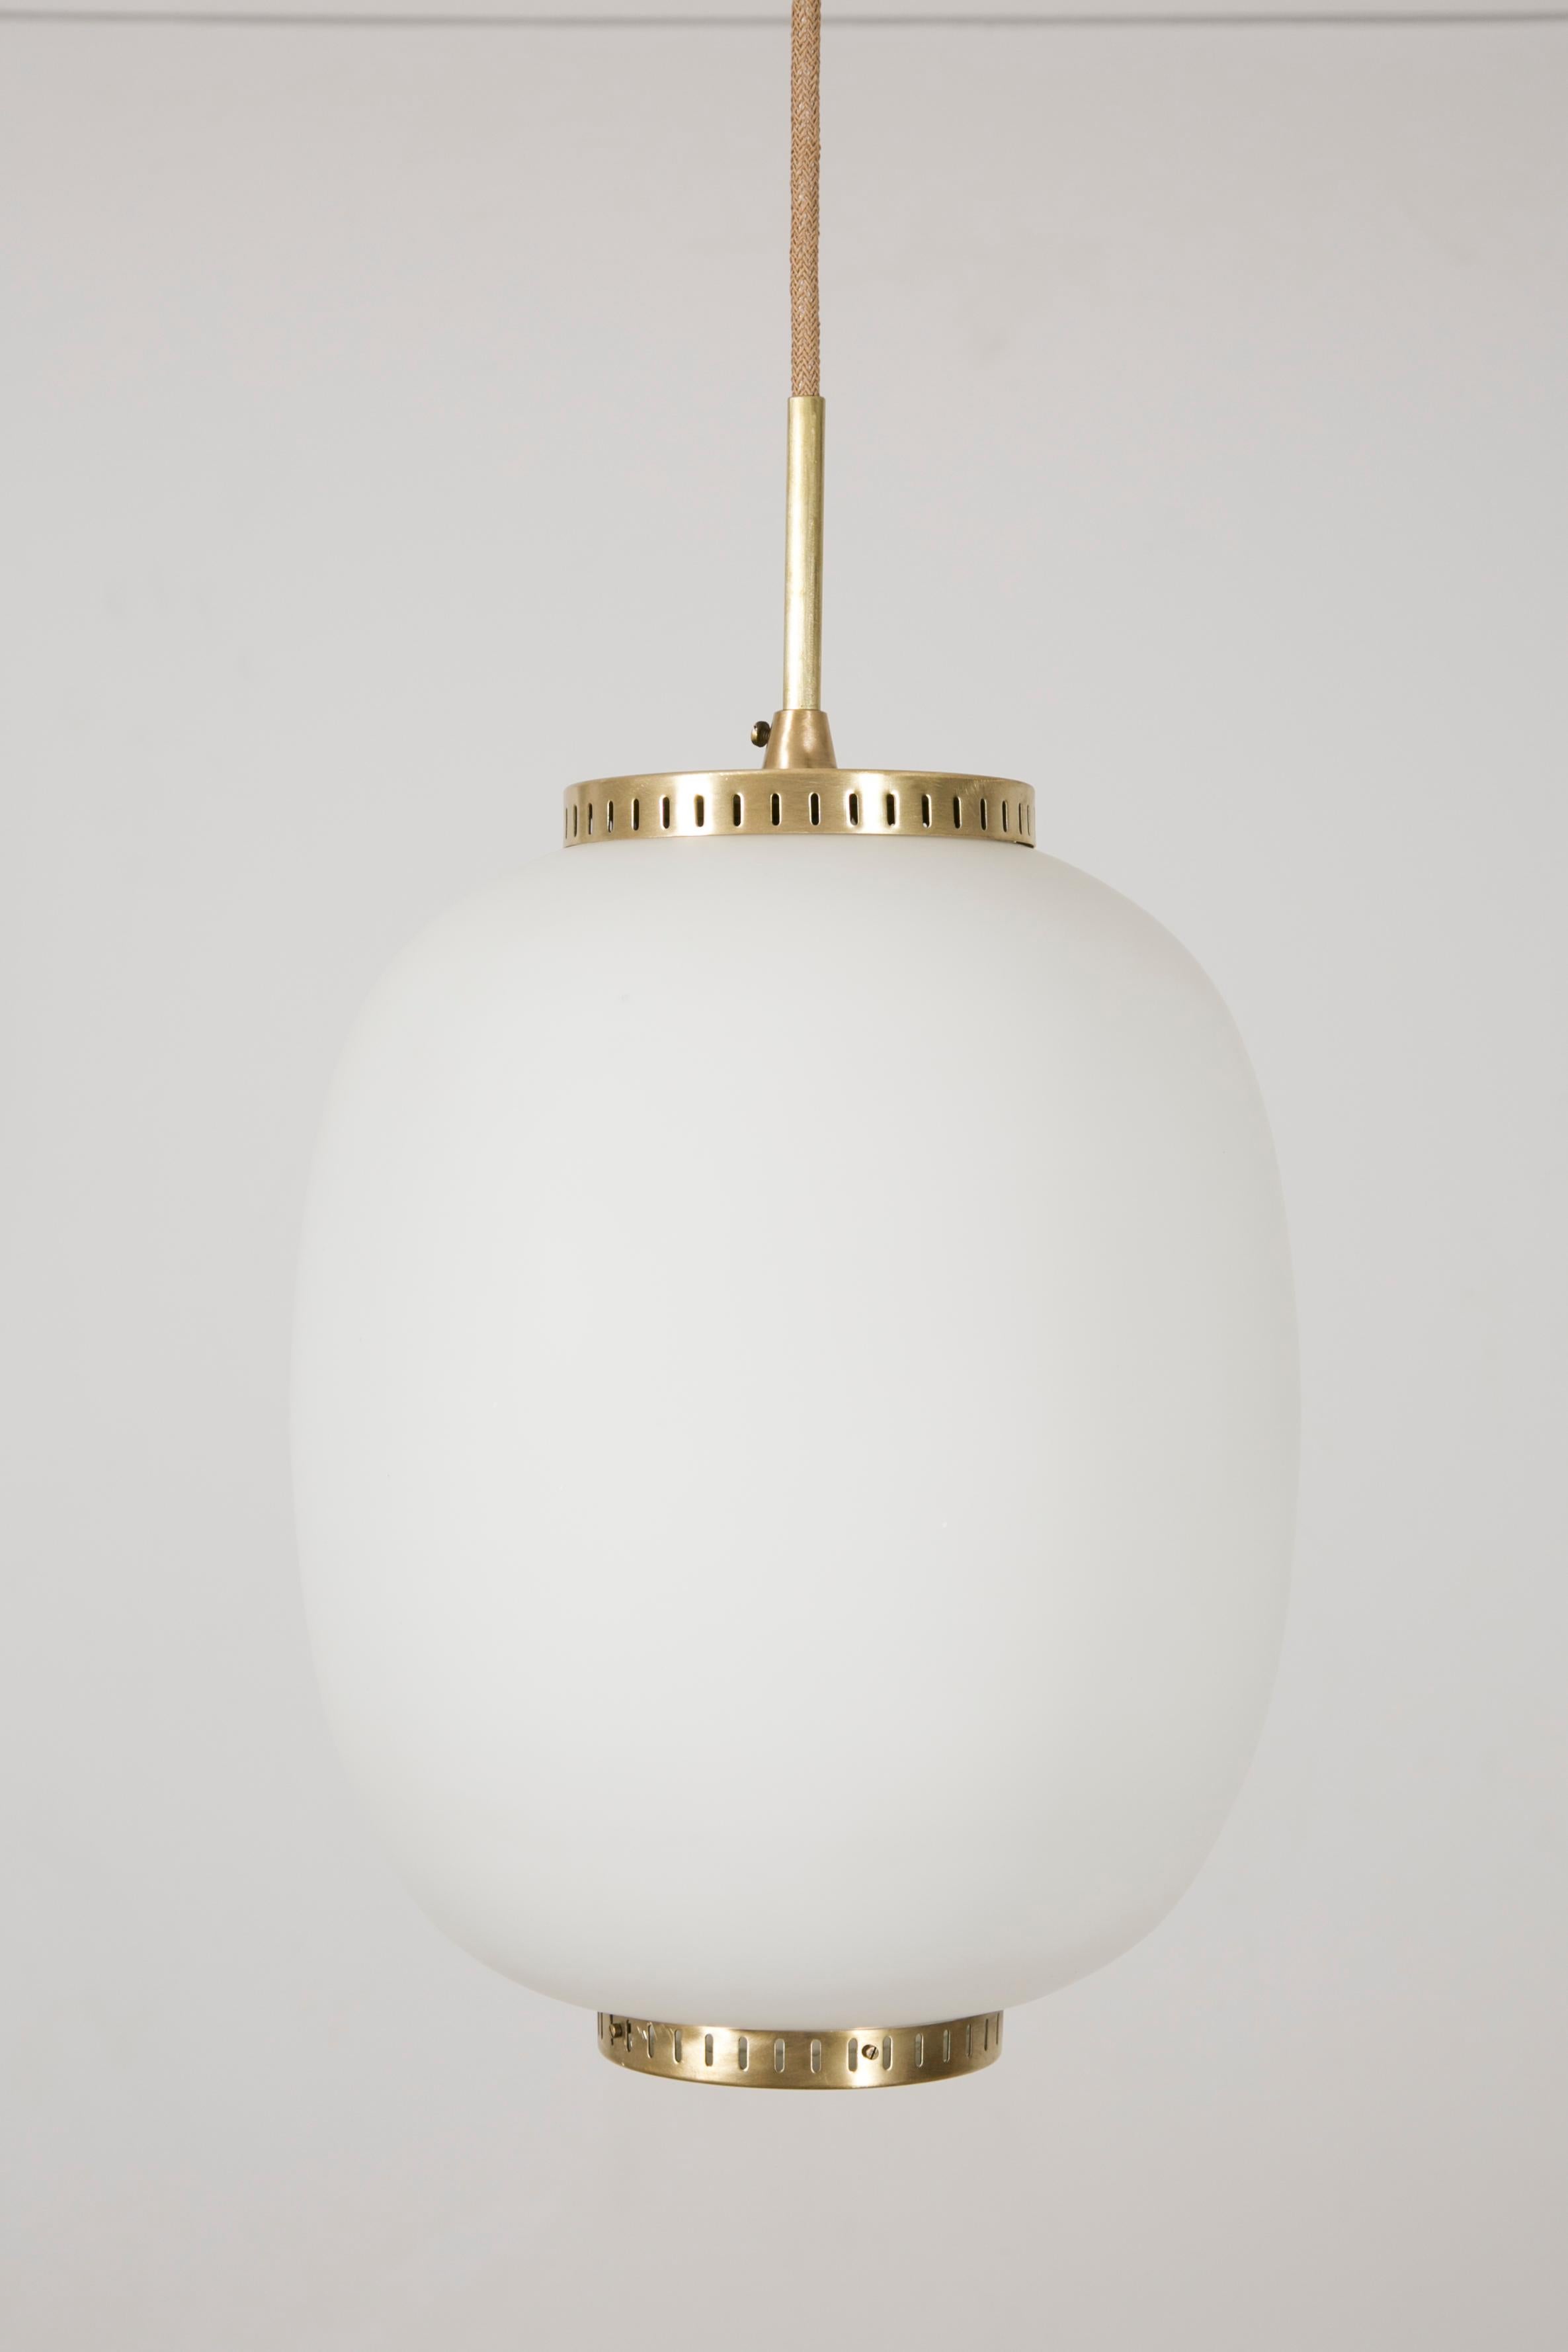 Mid-20th Century Collection of 11 Opaline Glass and Brass Ceiling Fixtures, Bent Karlby for Lyfa